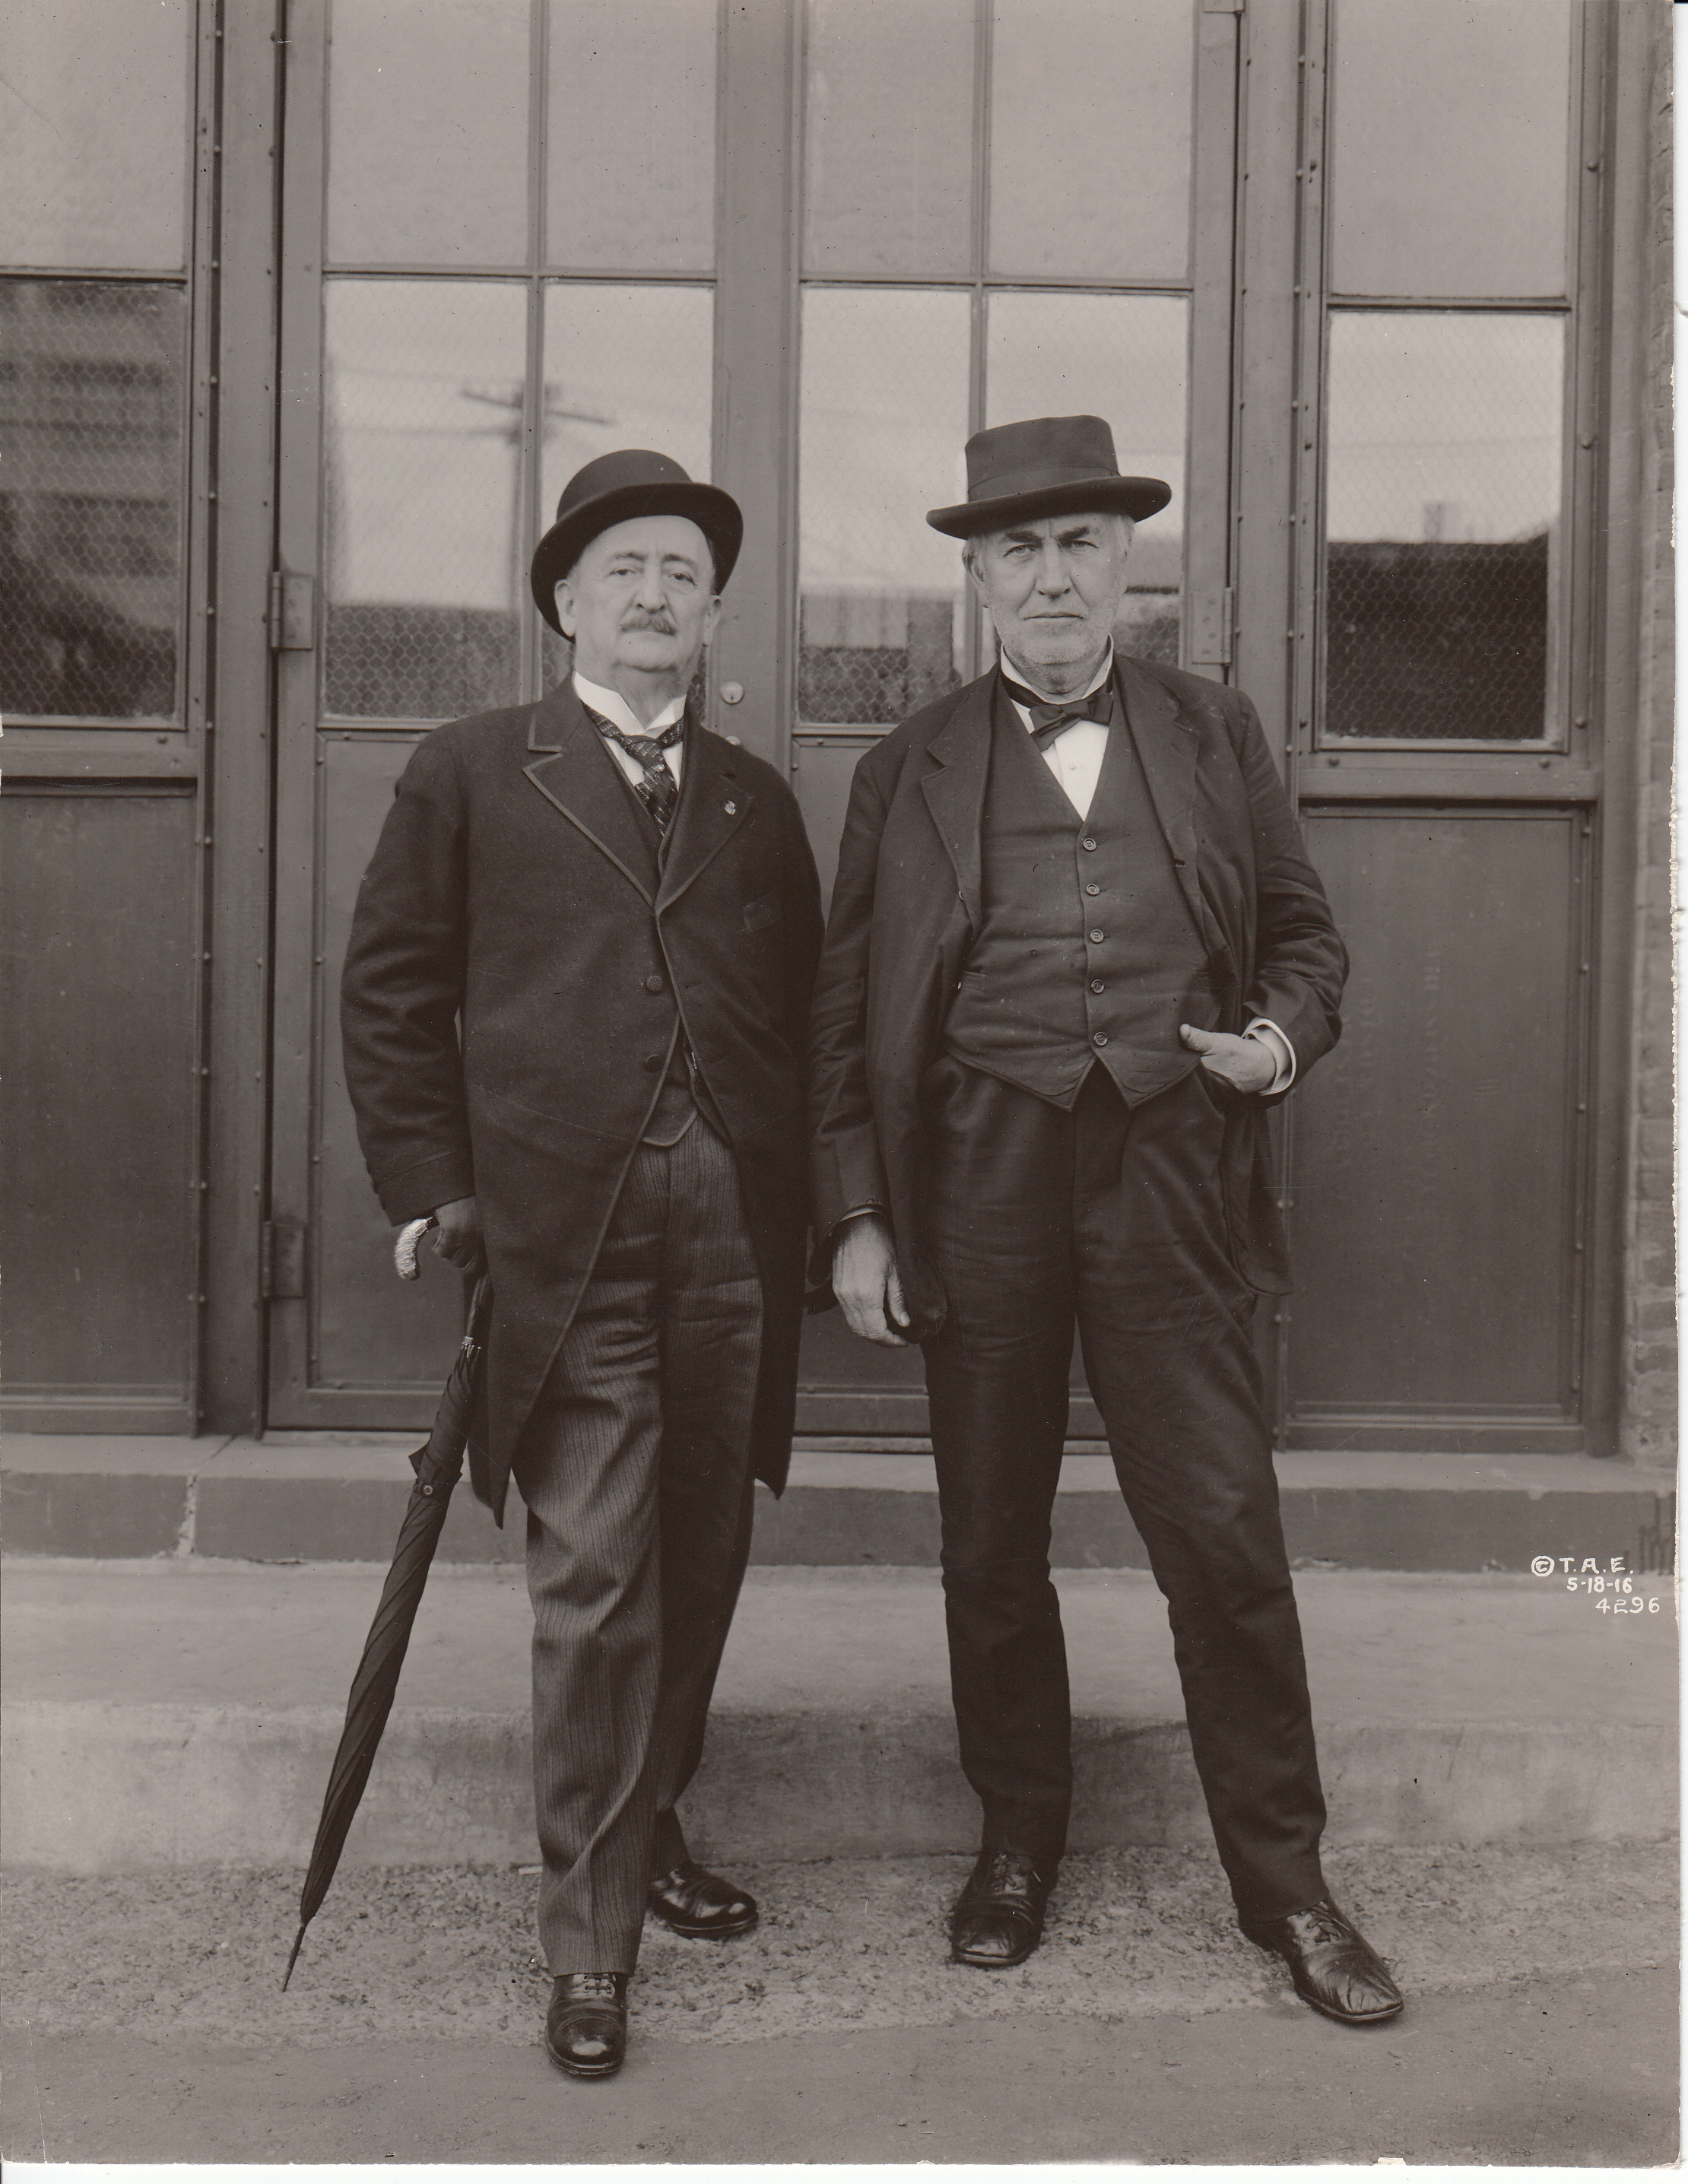 Mr. Francisco Madero Hernandez Sr. and Thomas Edison in front of the Building 5 entrance at Edison's West Orange Laboratory.